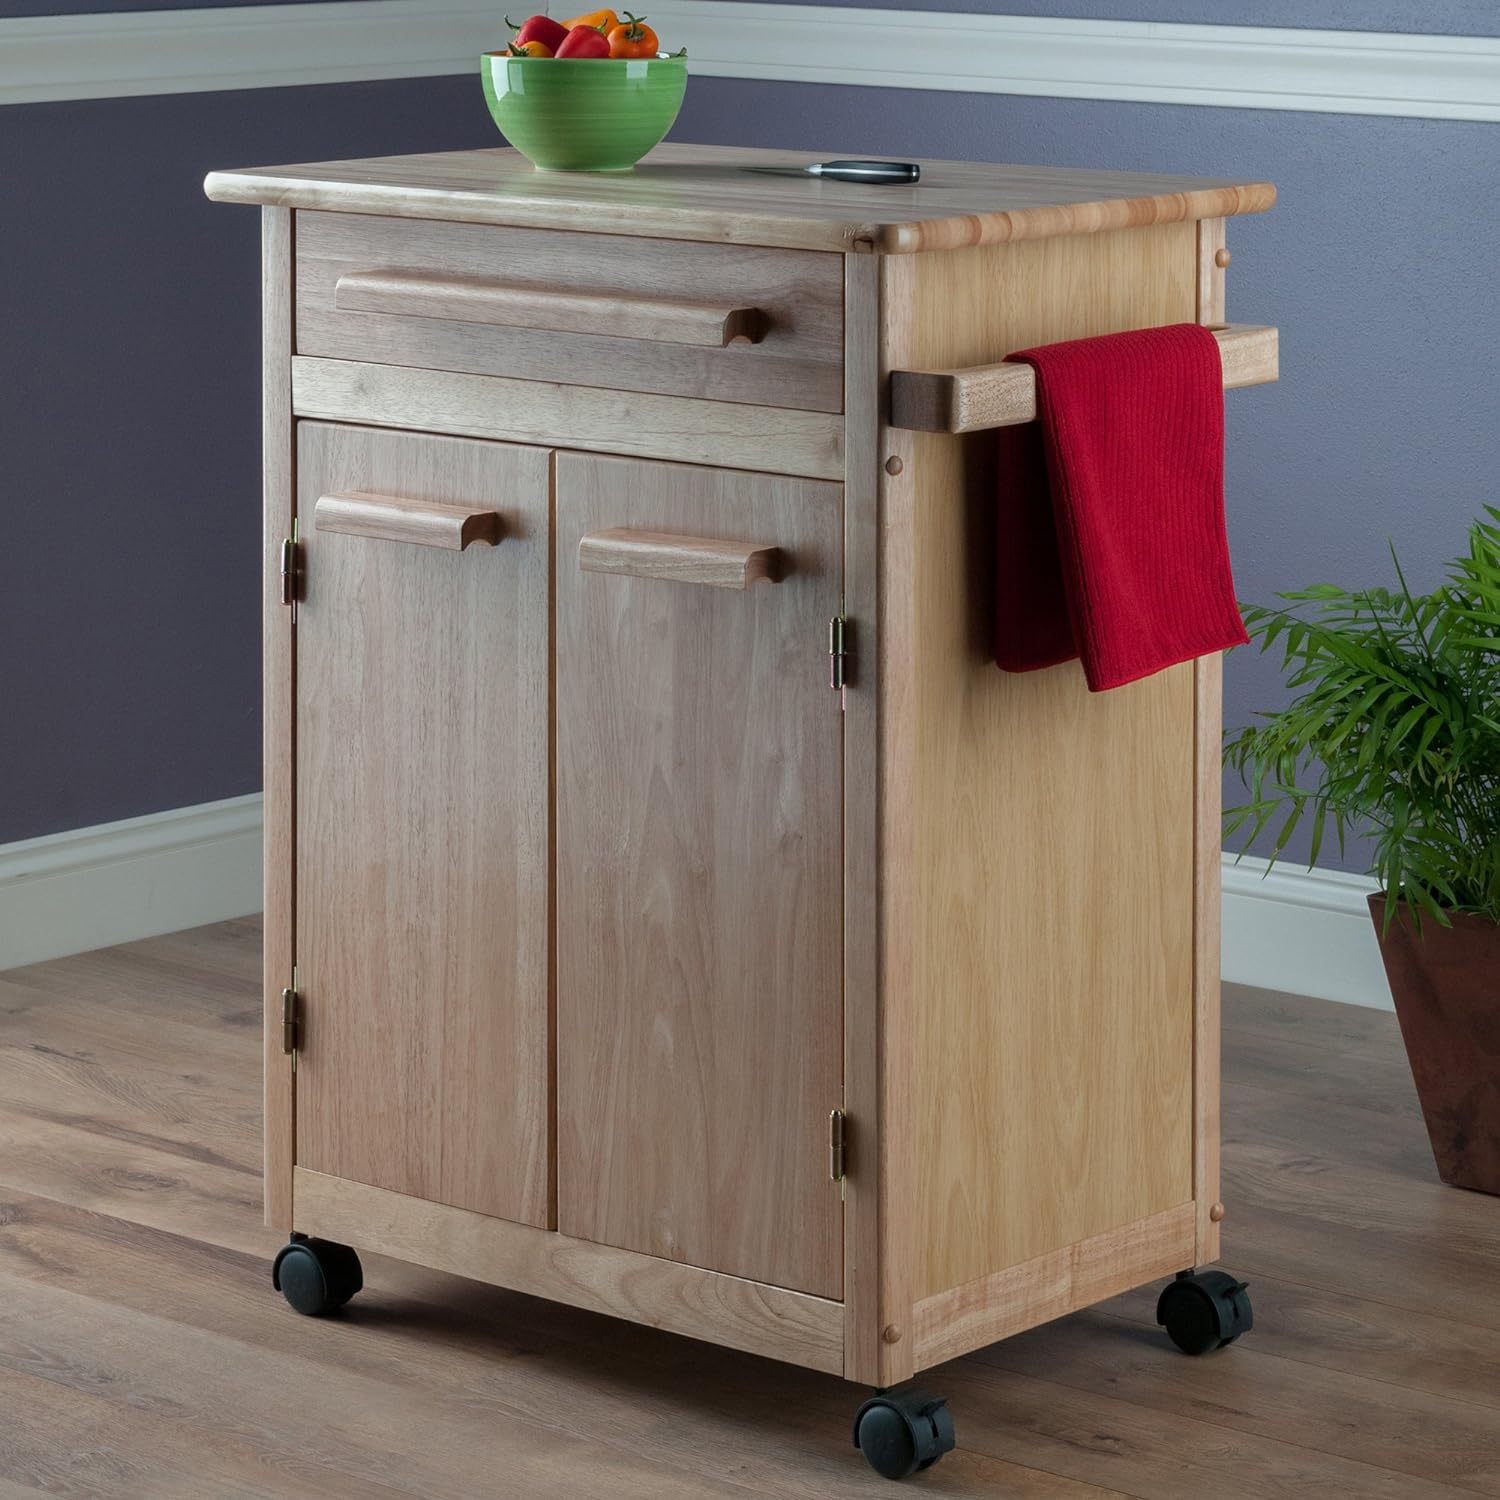 Winsome Wood Kitchen Cart, Natural, Single Drawer (82027)